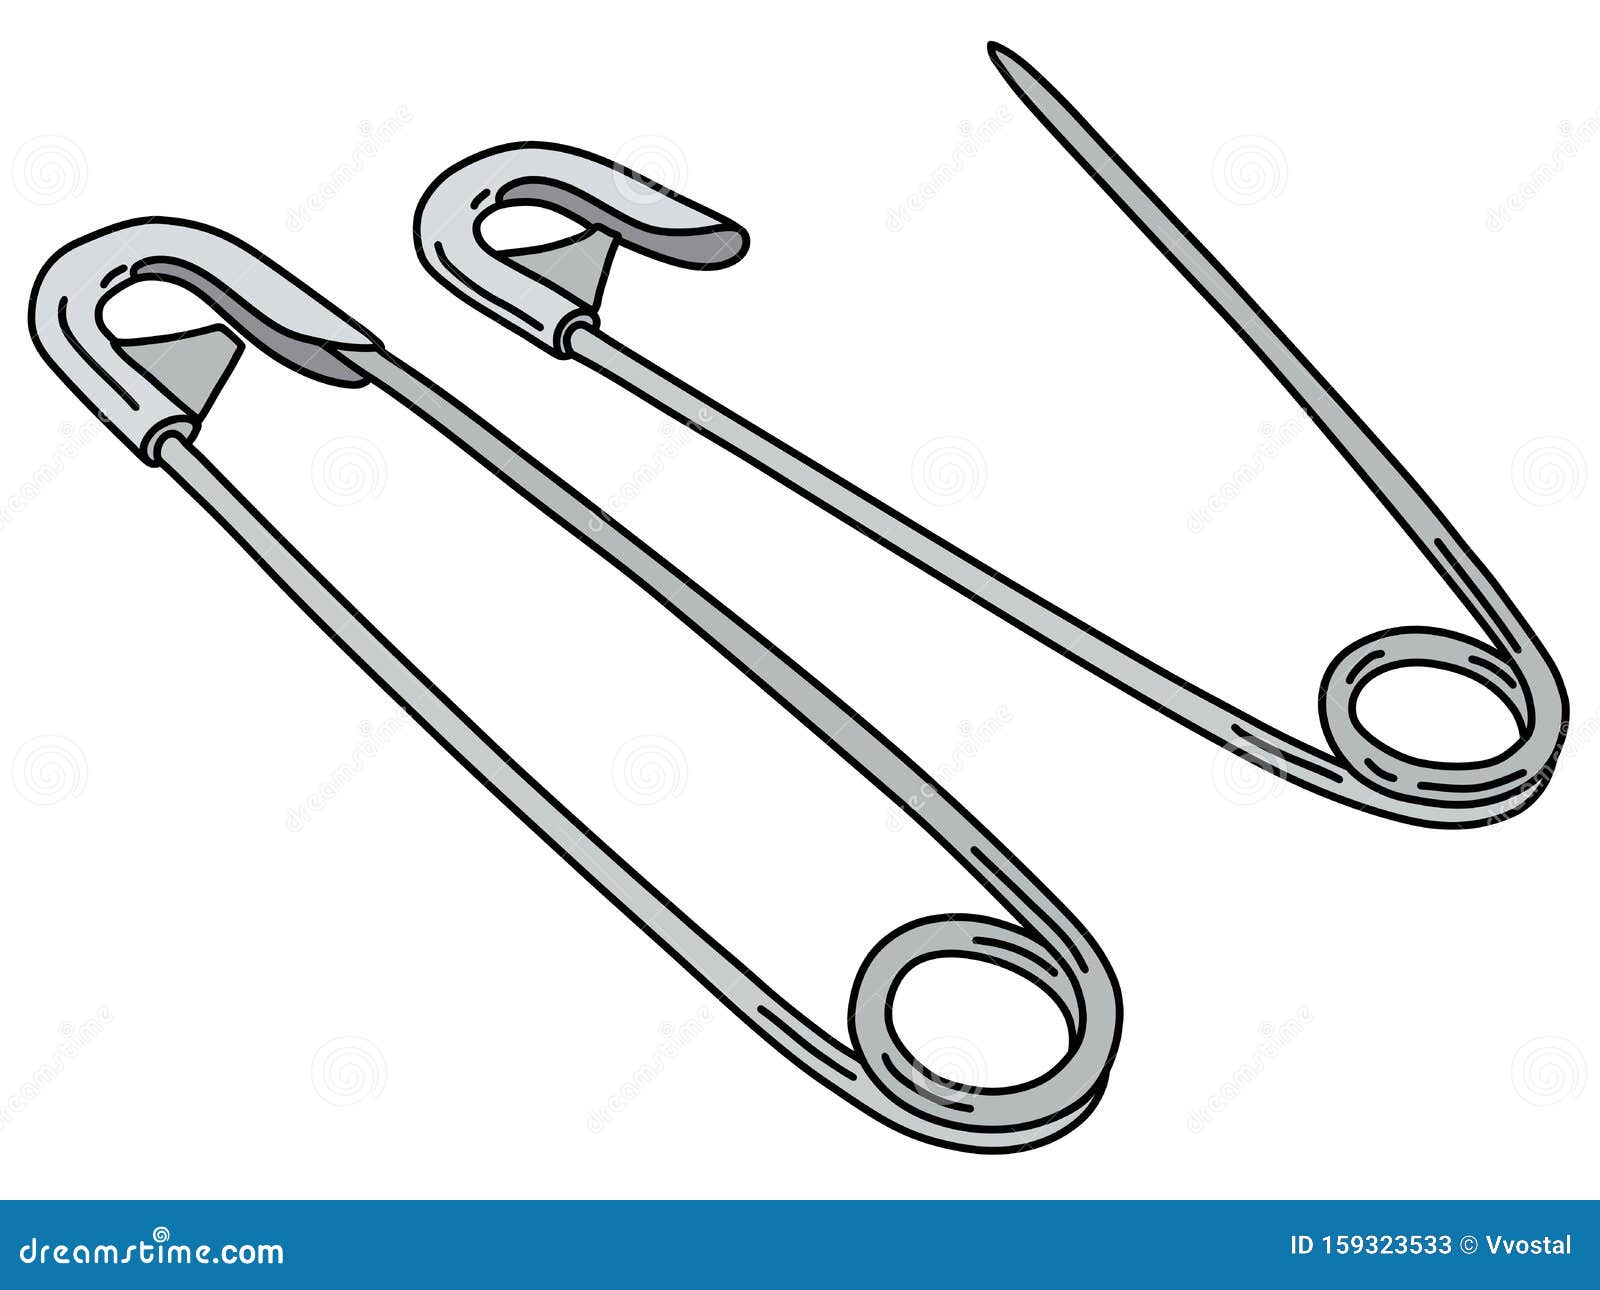 Two Classic Steel Safety Pins Stock Vector - Illustration of cartoonpin,  push: 159323533